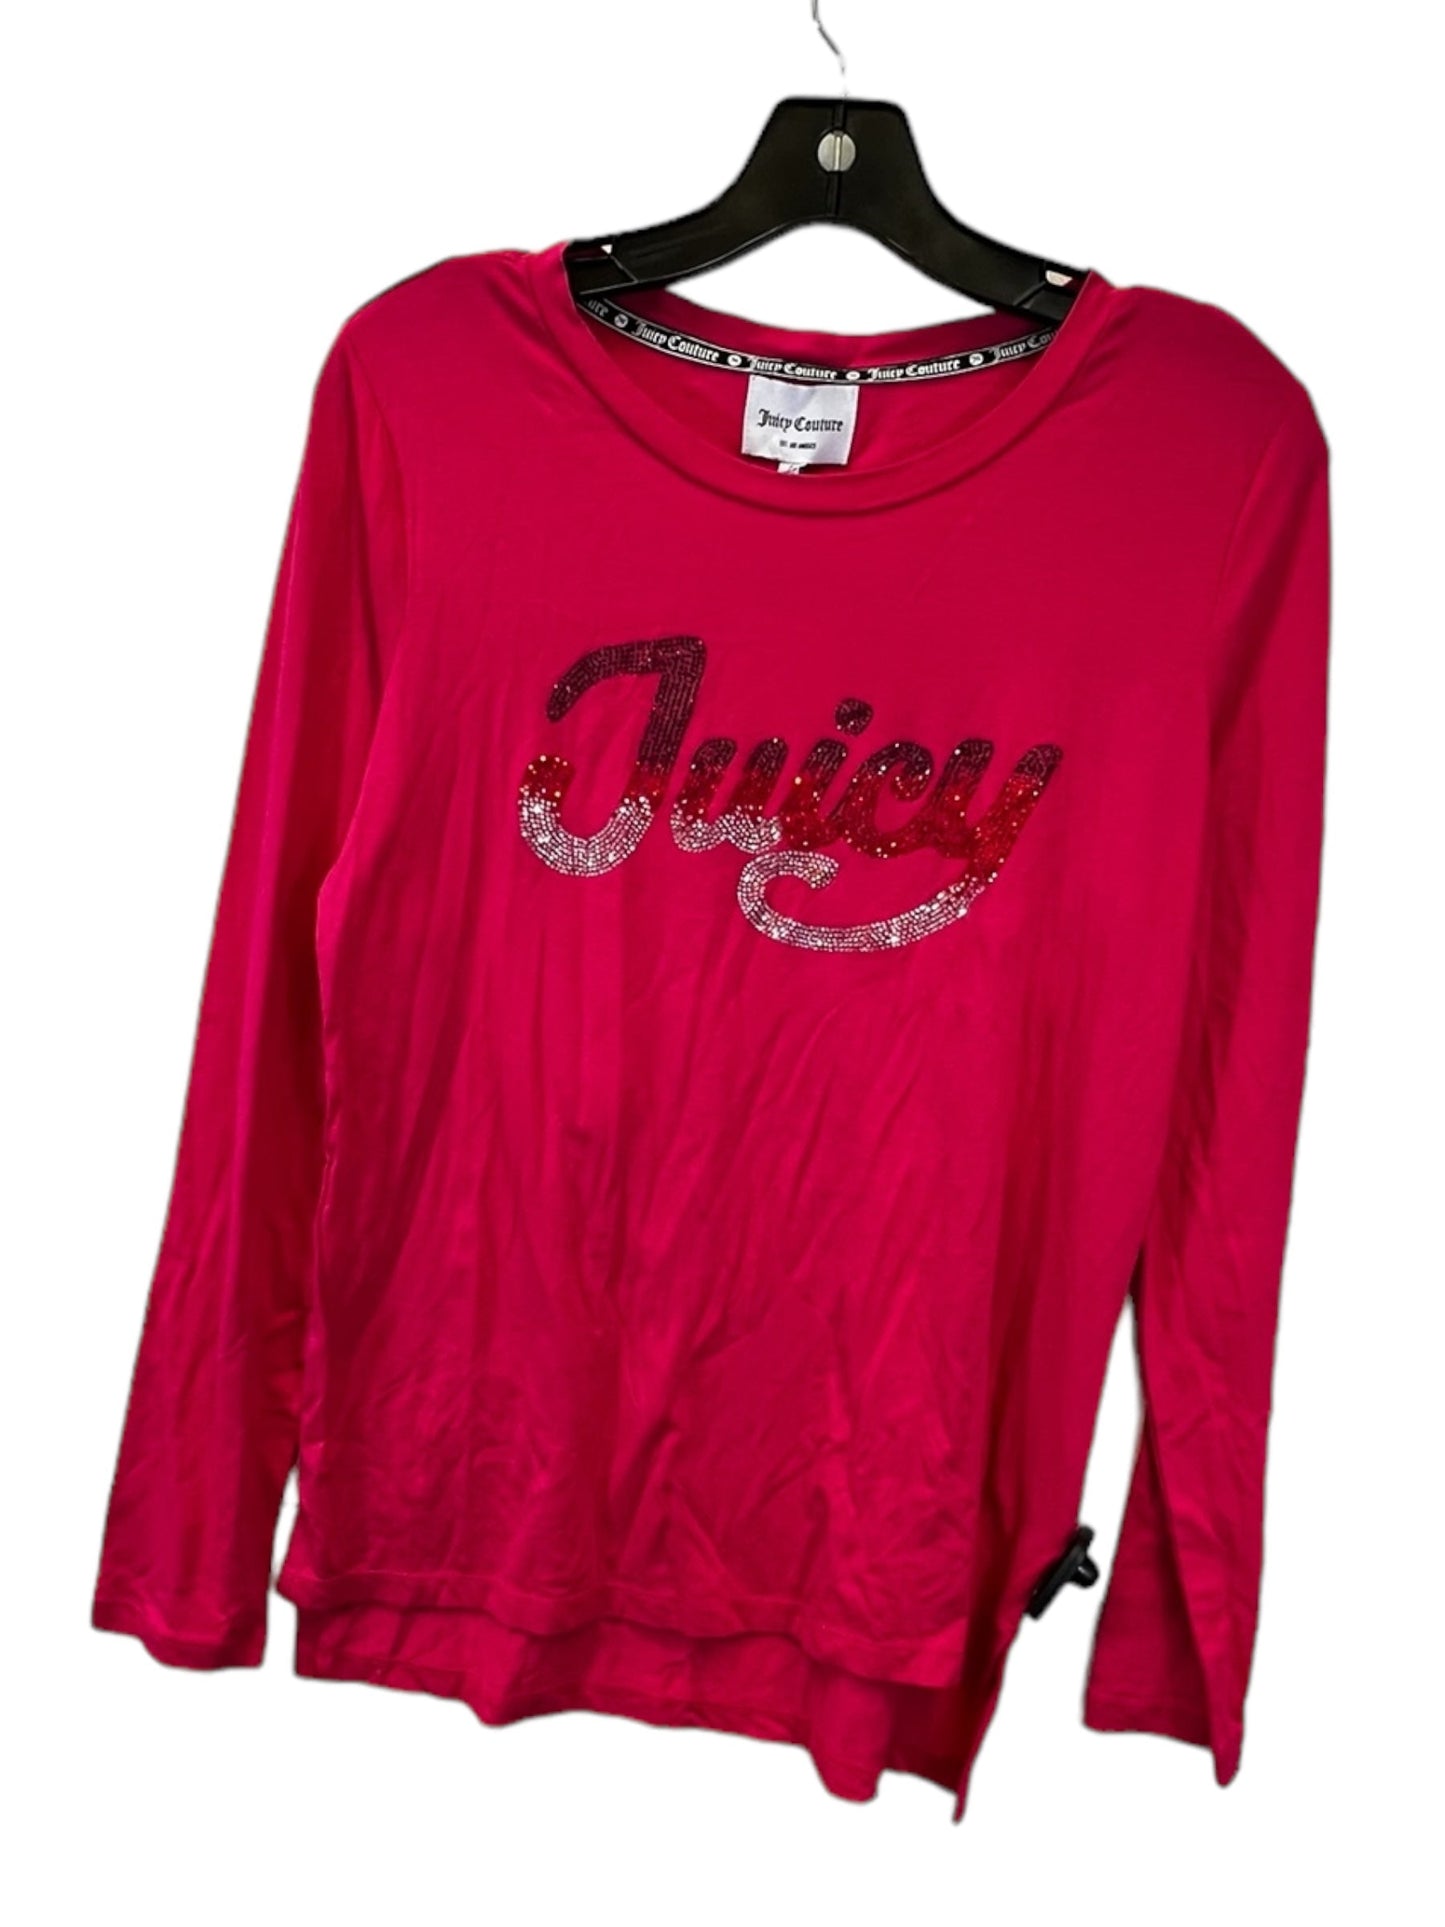 Pink Top Long Sleeve Juicy Couture, Size S